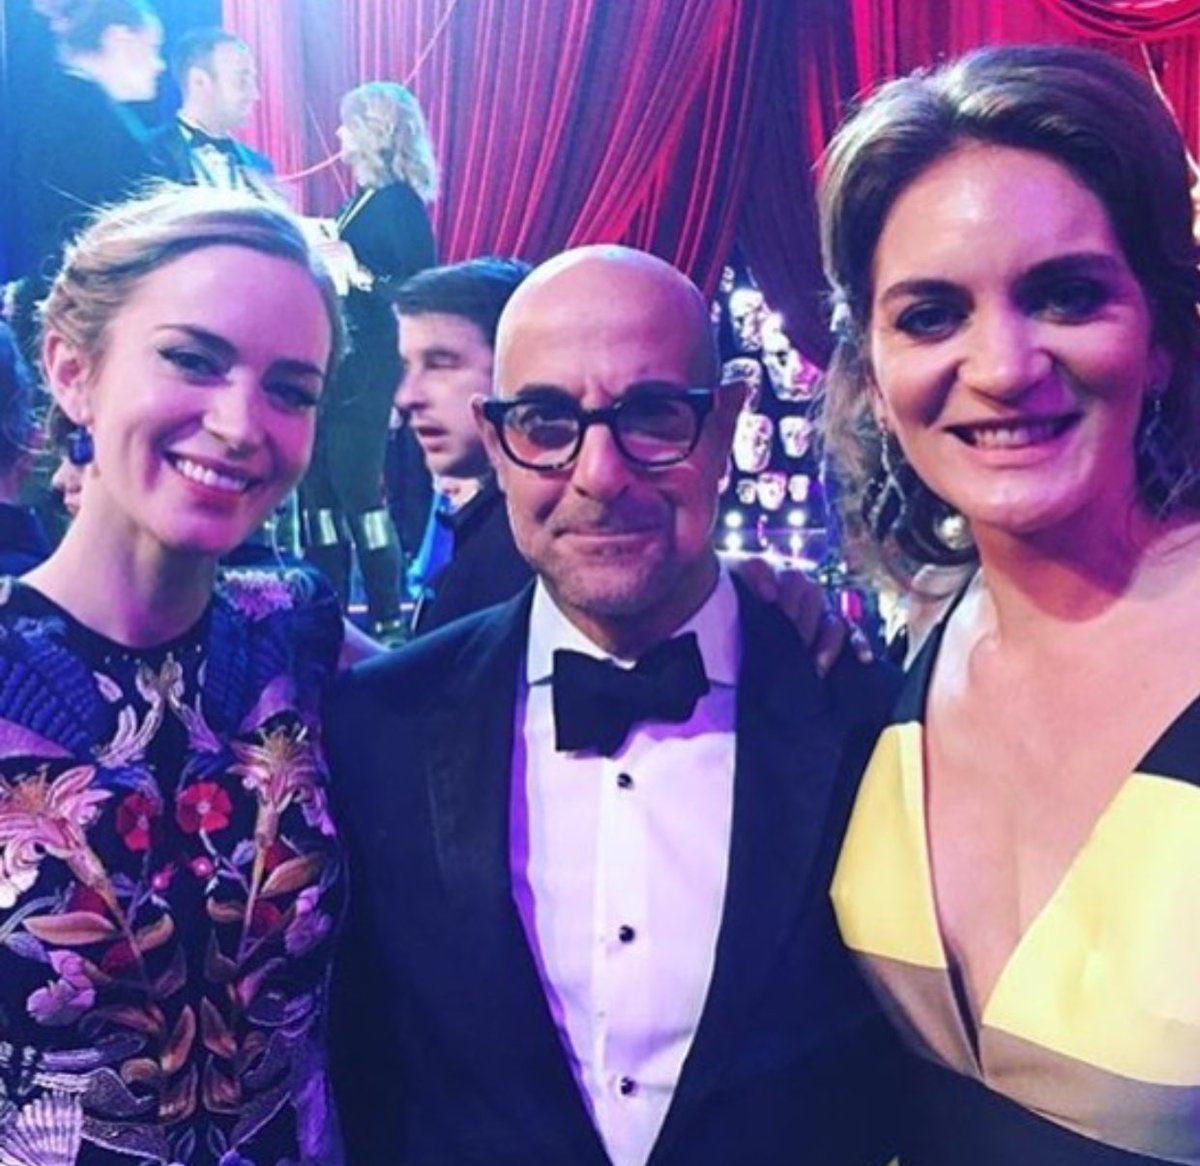 emily blunt & stanley tucci:"i can't believe you slept with my wife” "oh my god! for the last time, we shared a bedroom! we were children growing up together!"